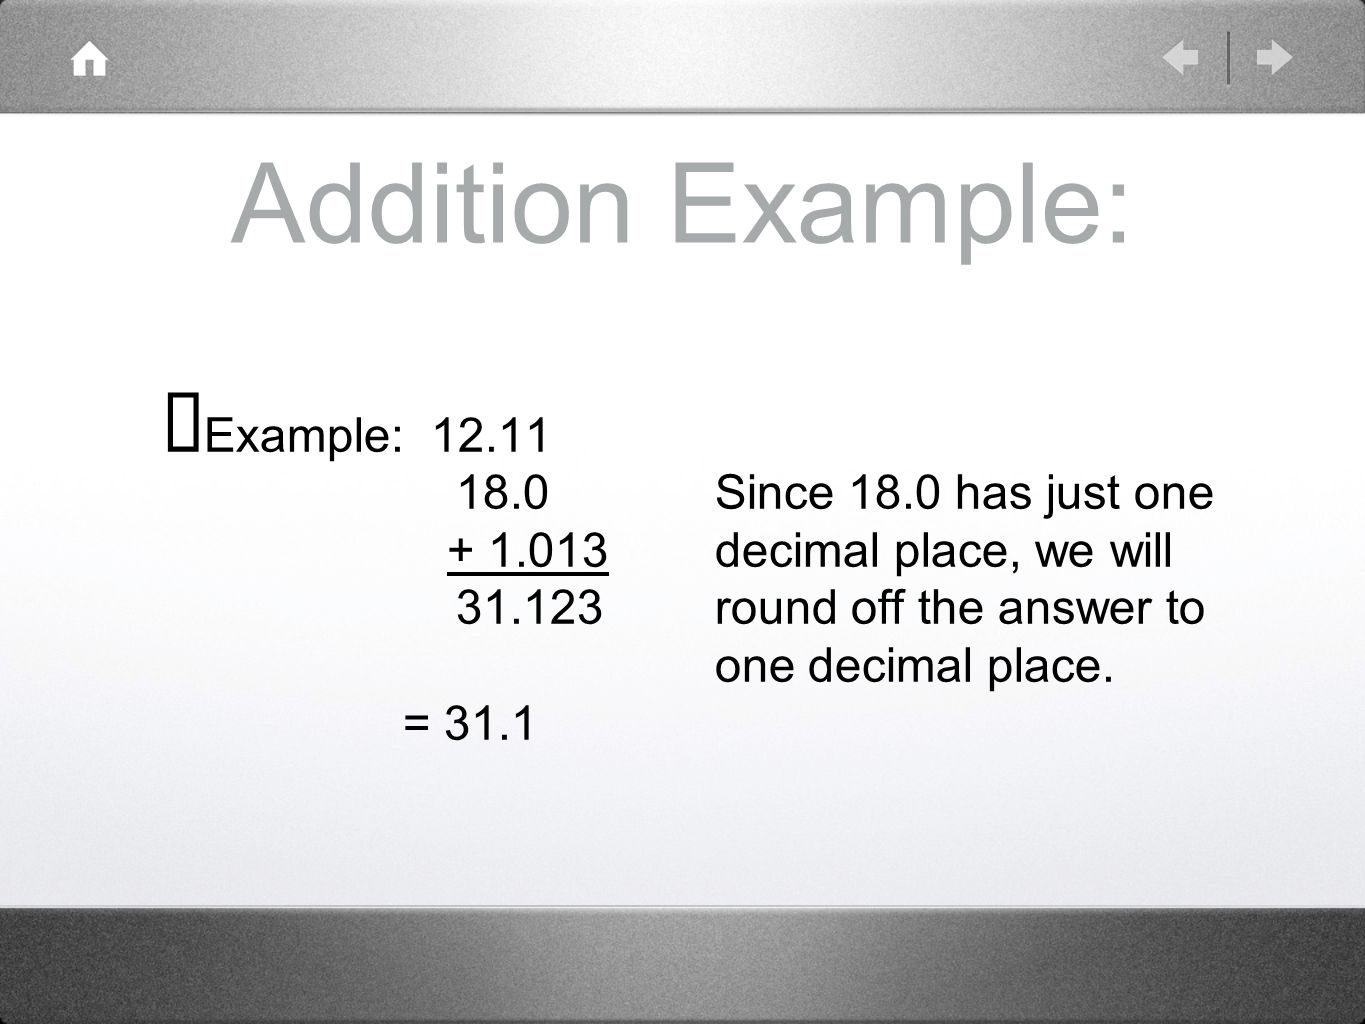 Addition Example: ➡ Example: Since 18.0 has just one decimal place, we will round off the answer to one decimal place.